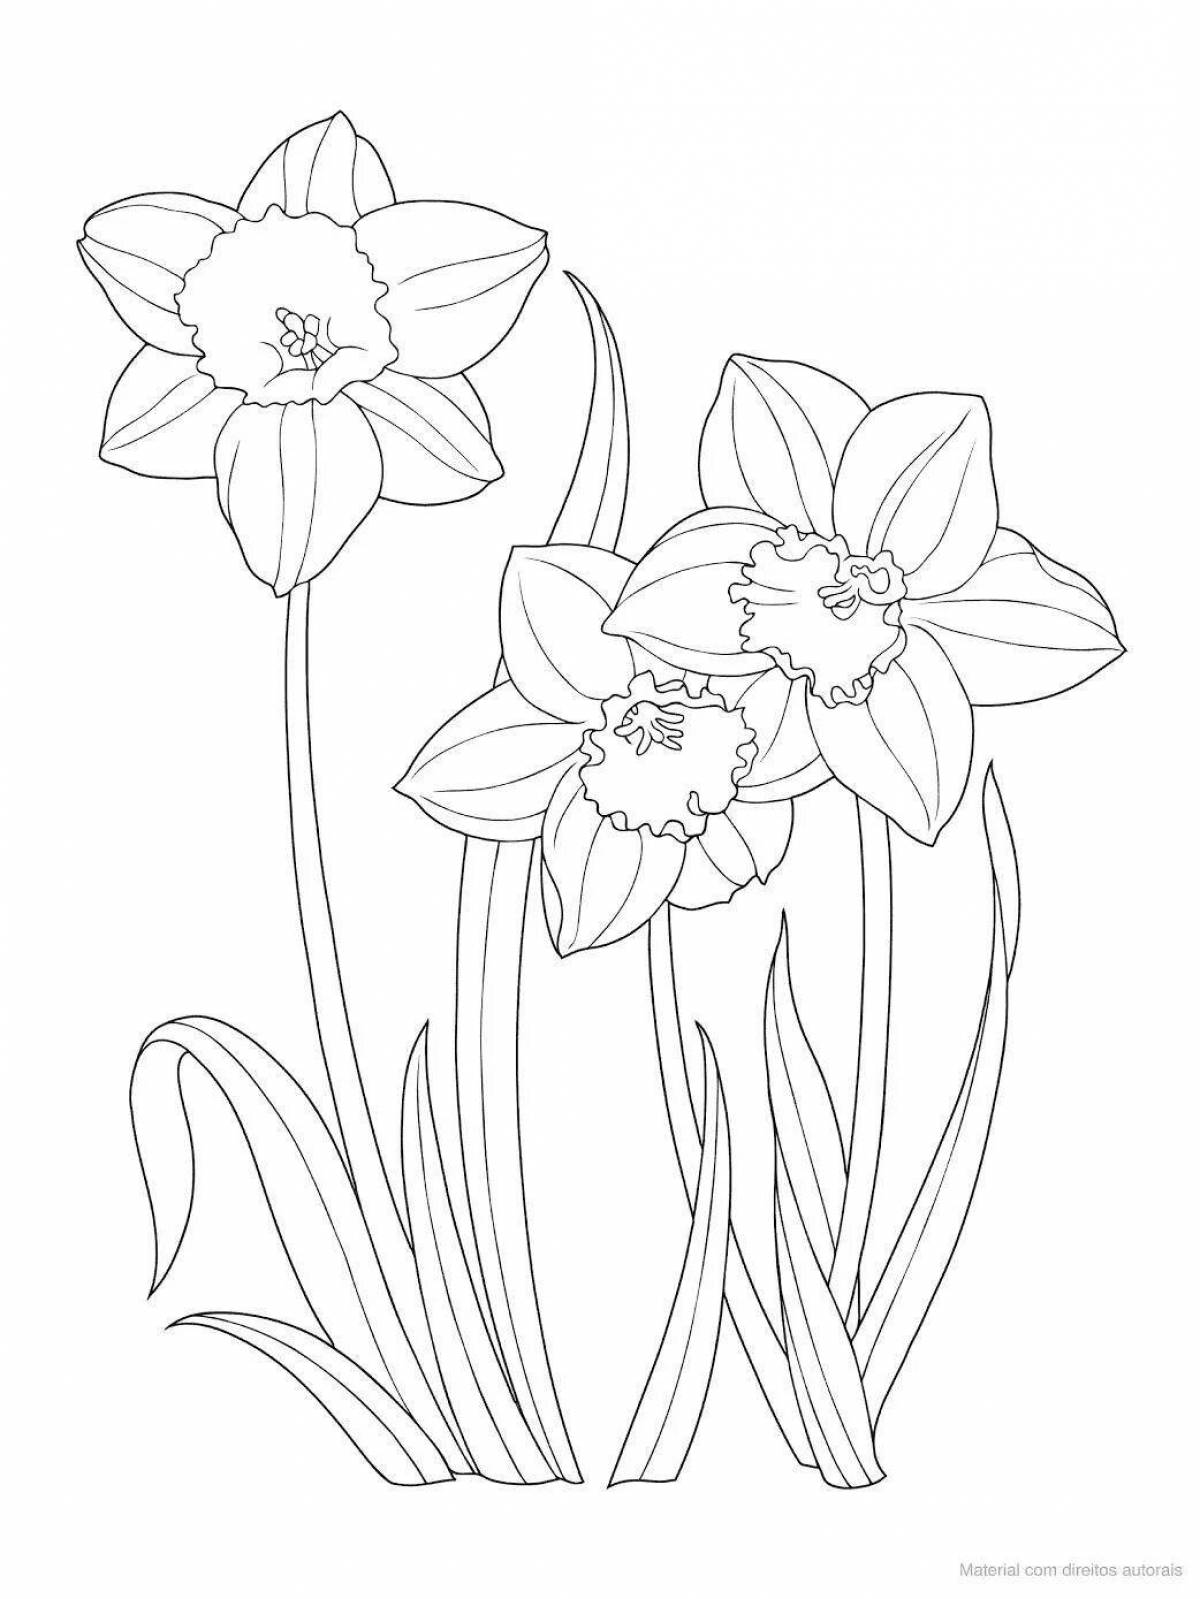 Adorable daffodil flower coloring page